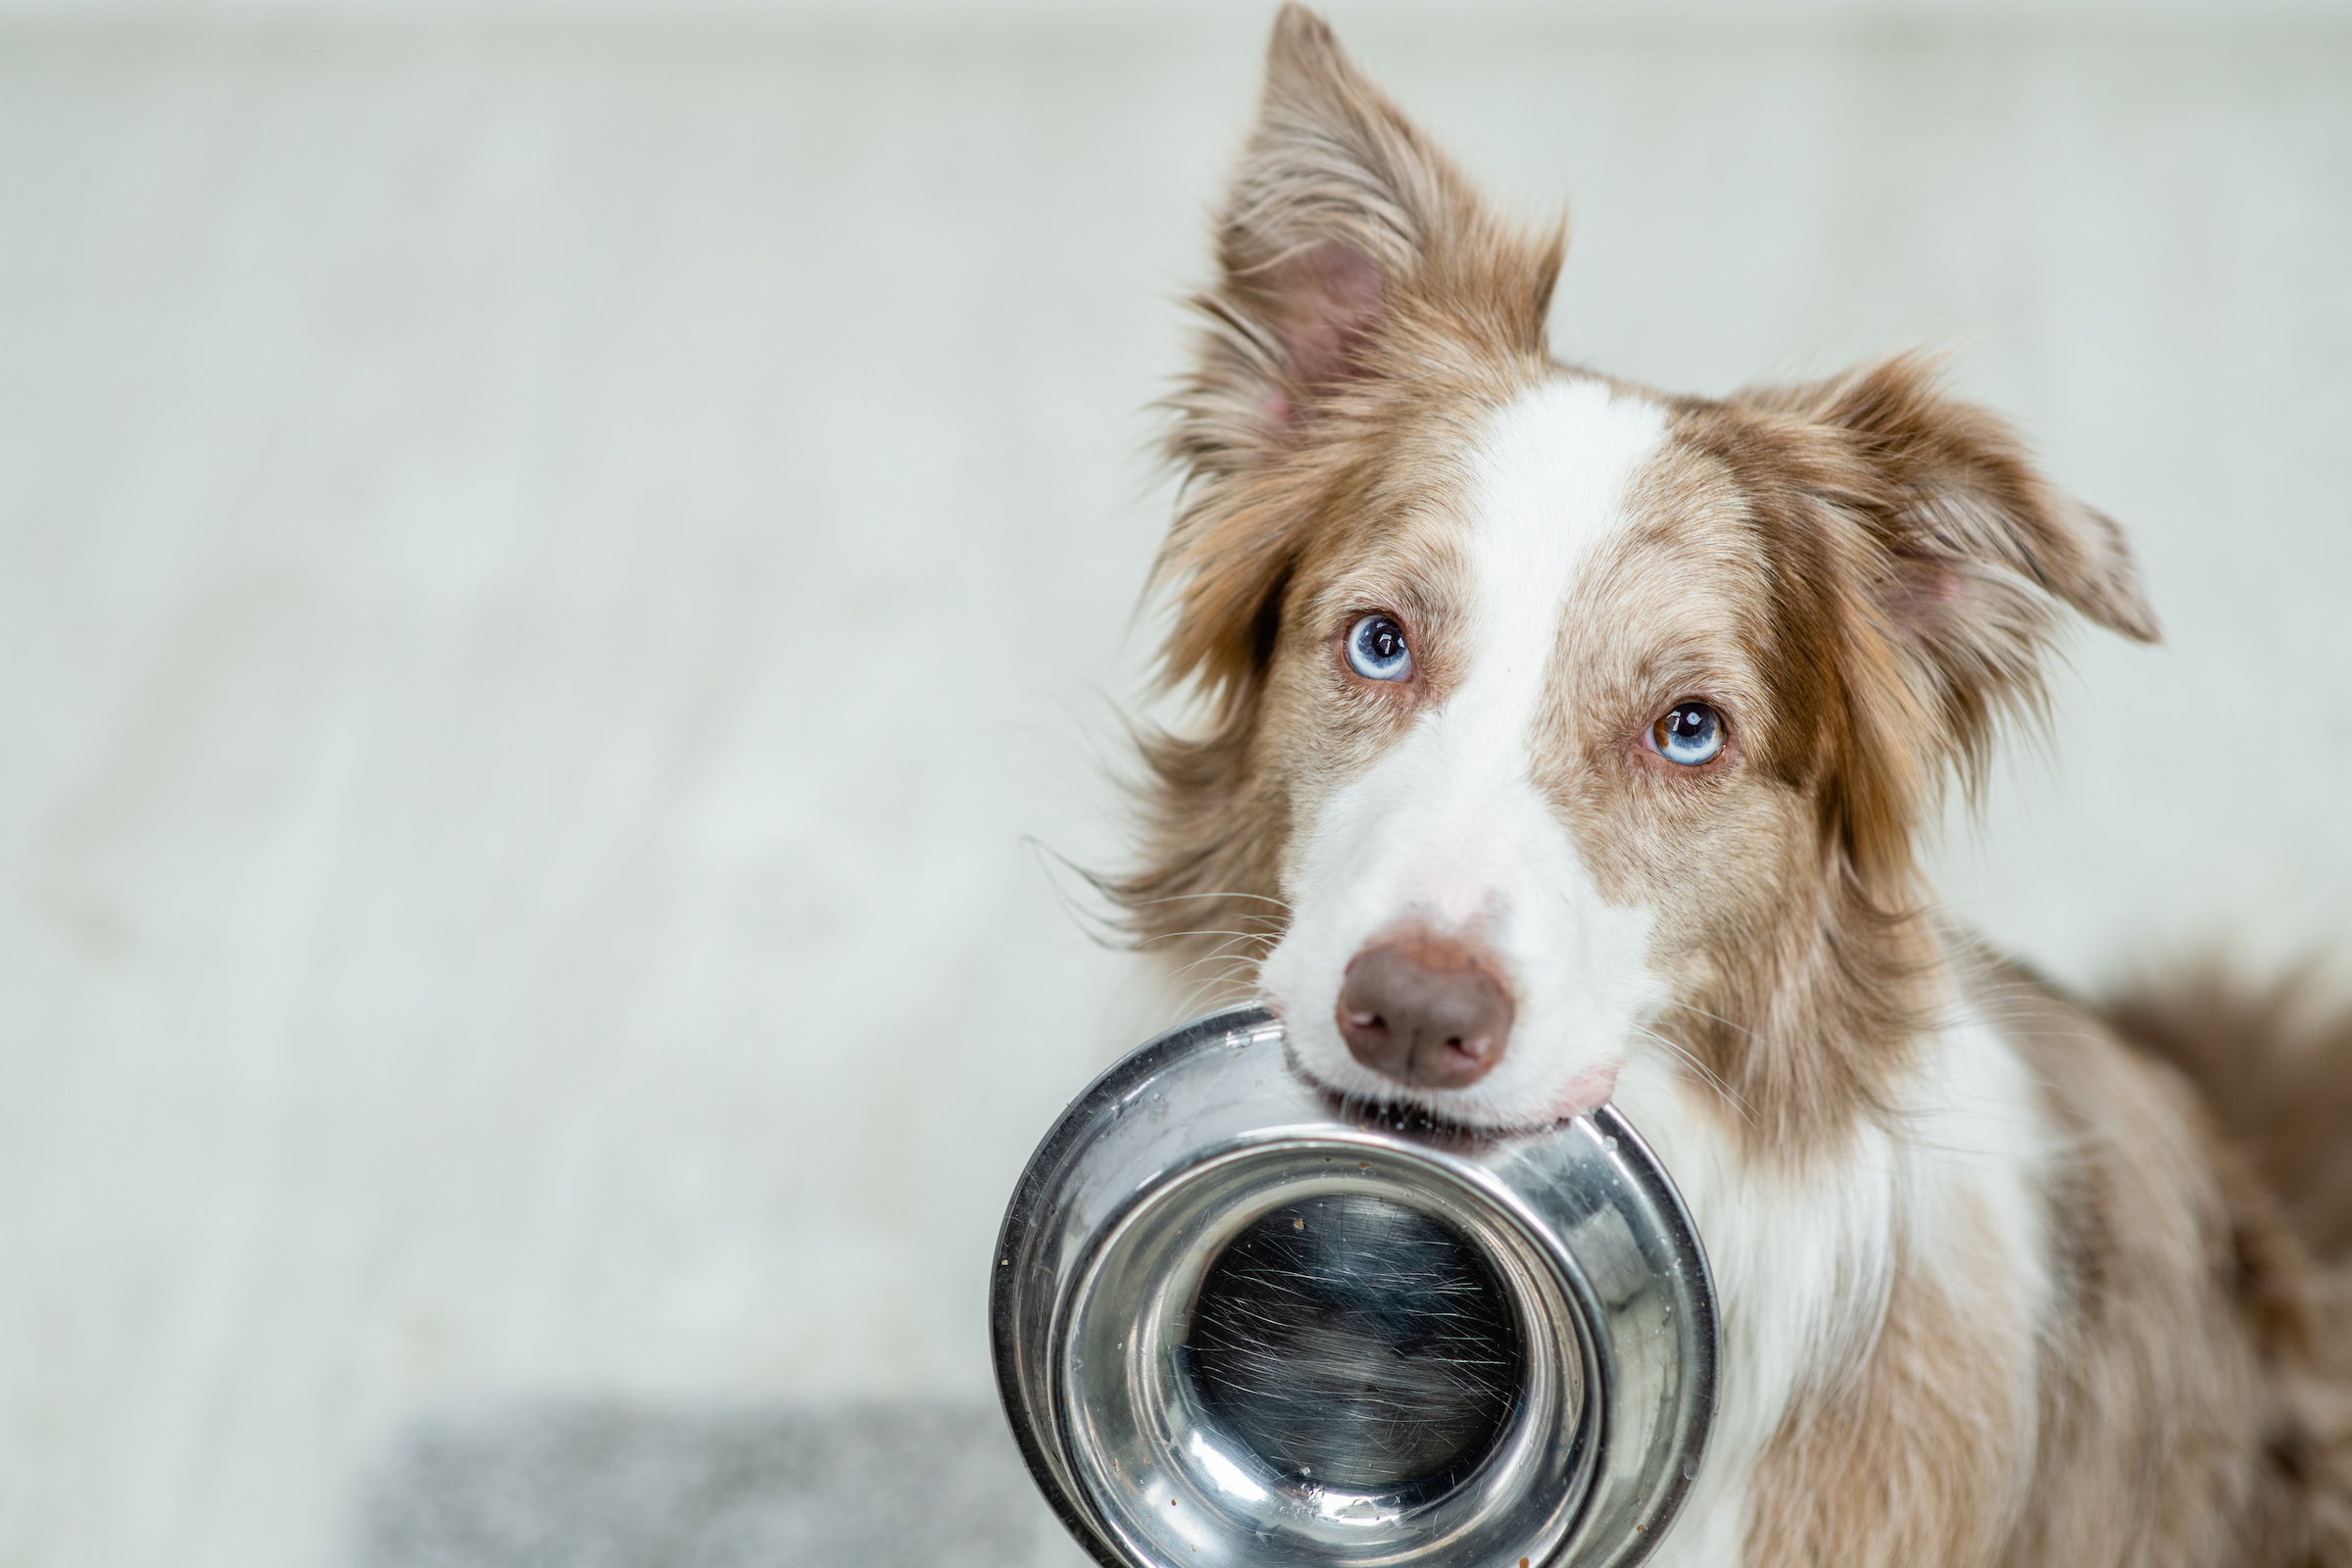 A border collie holds an empty food bowl in their mouth